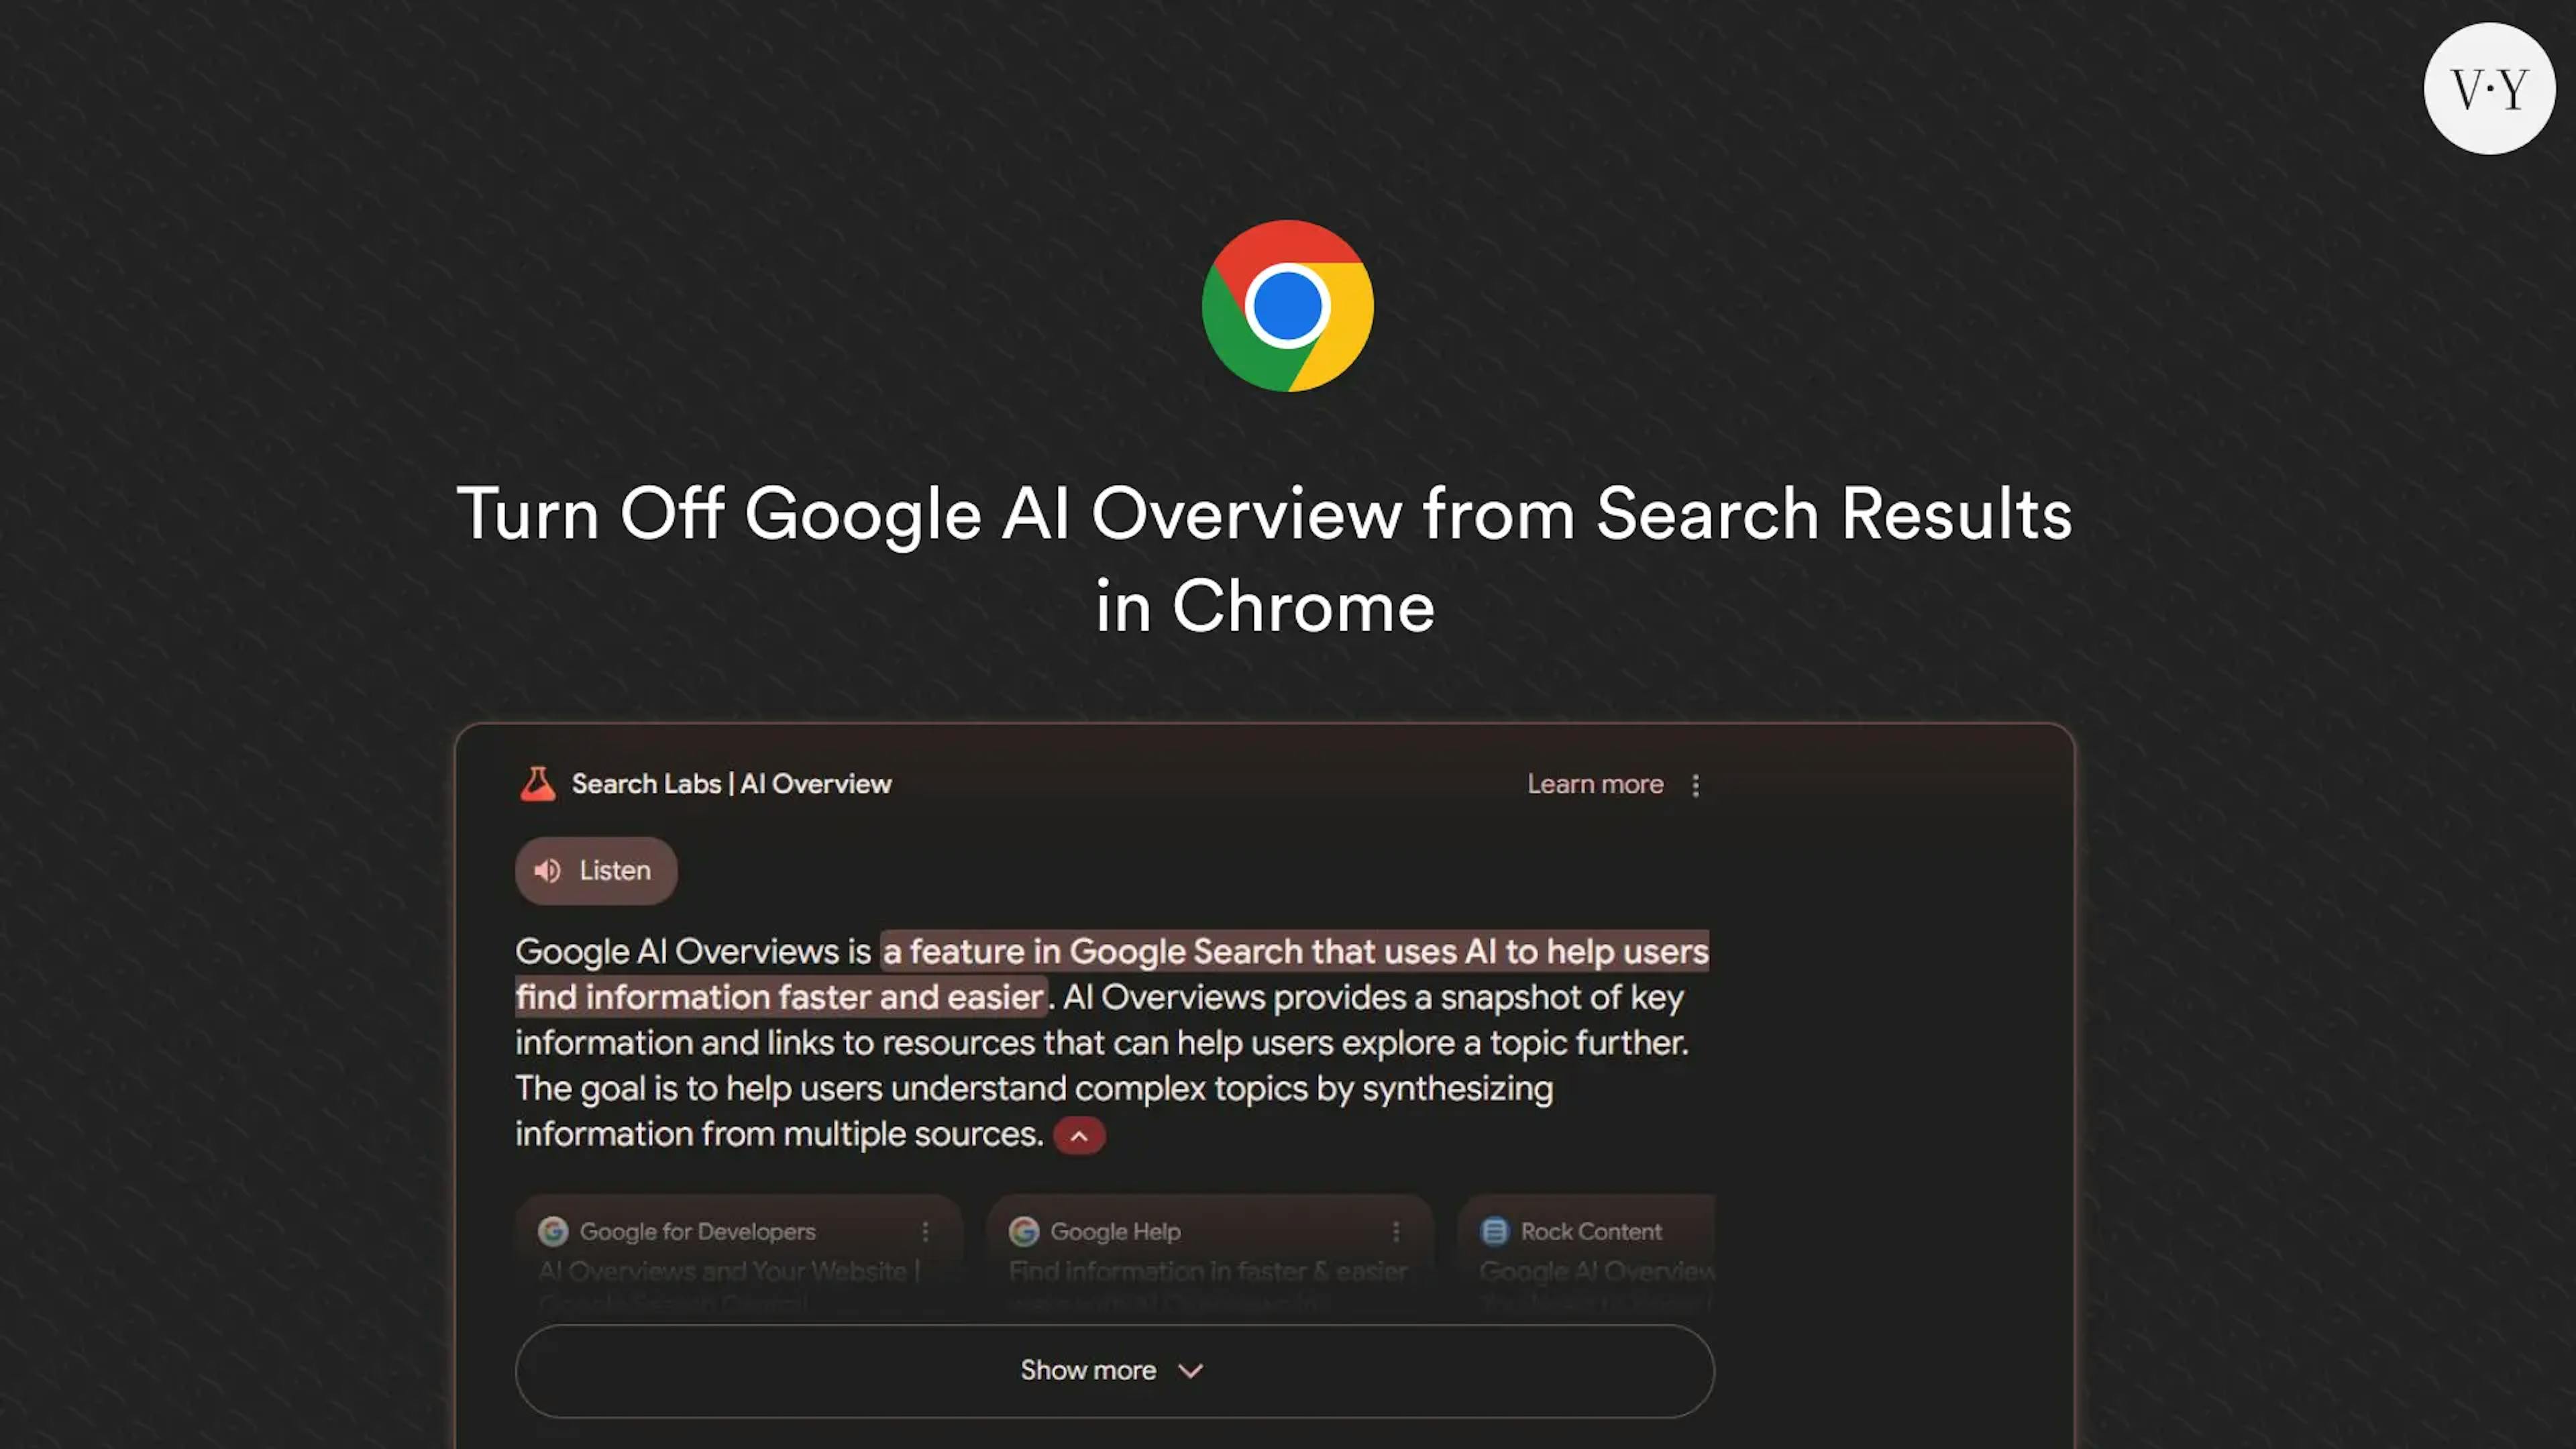 featured image - Turn Off Google AI Overview From Search Results in Chrome